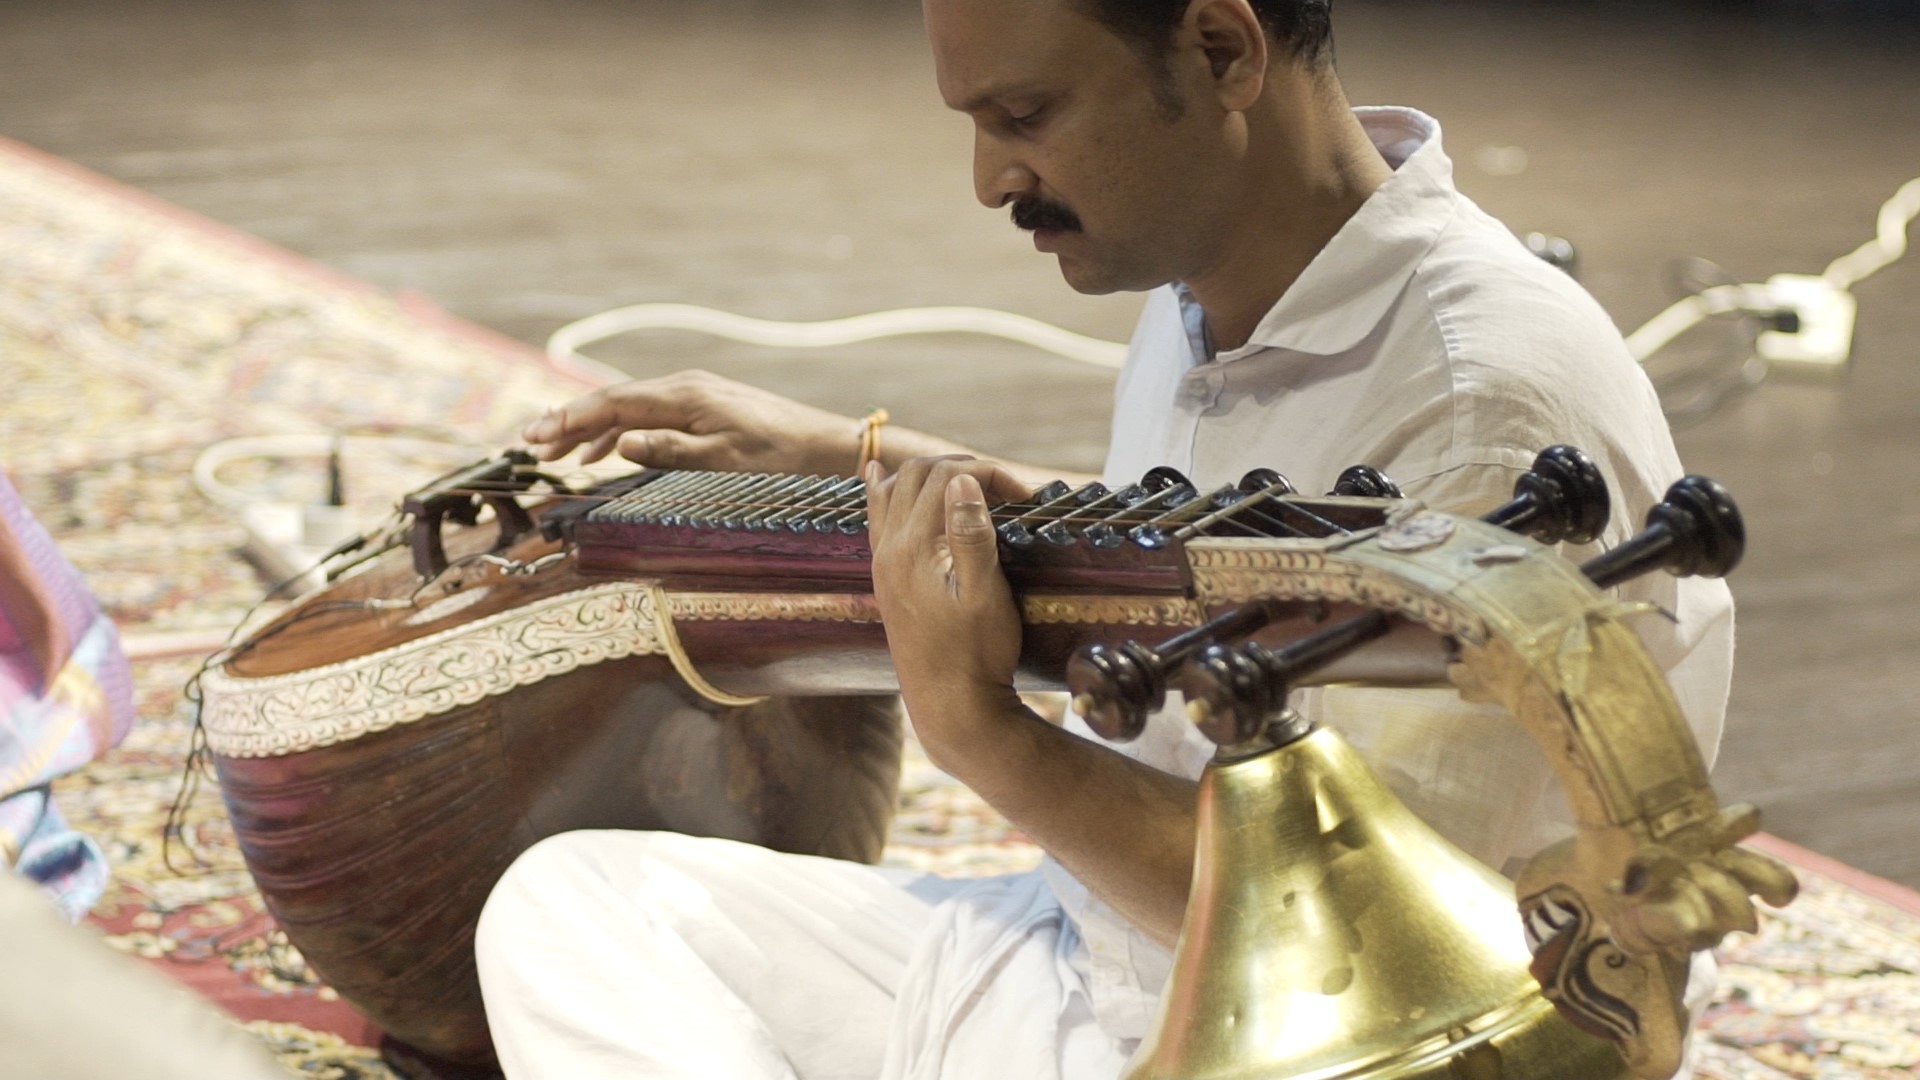 A Carnatic musician playing a stringed instrument known as the veena at the Nrityalaya Aesthetics Society. It takes years for such practitioners to reach advanced levels of mastery.